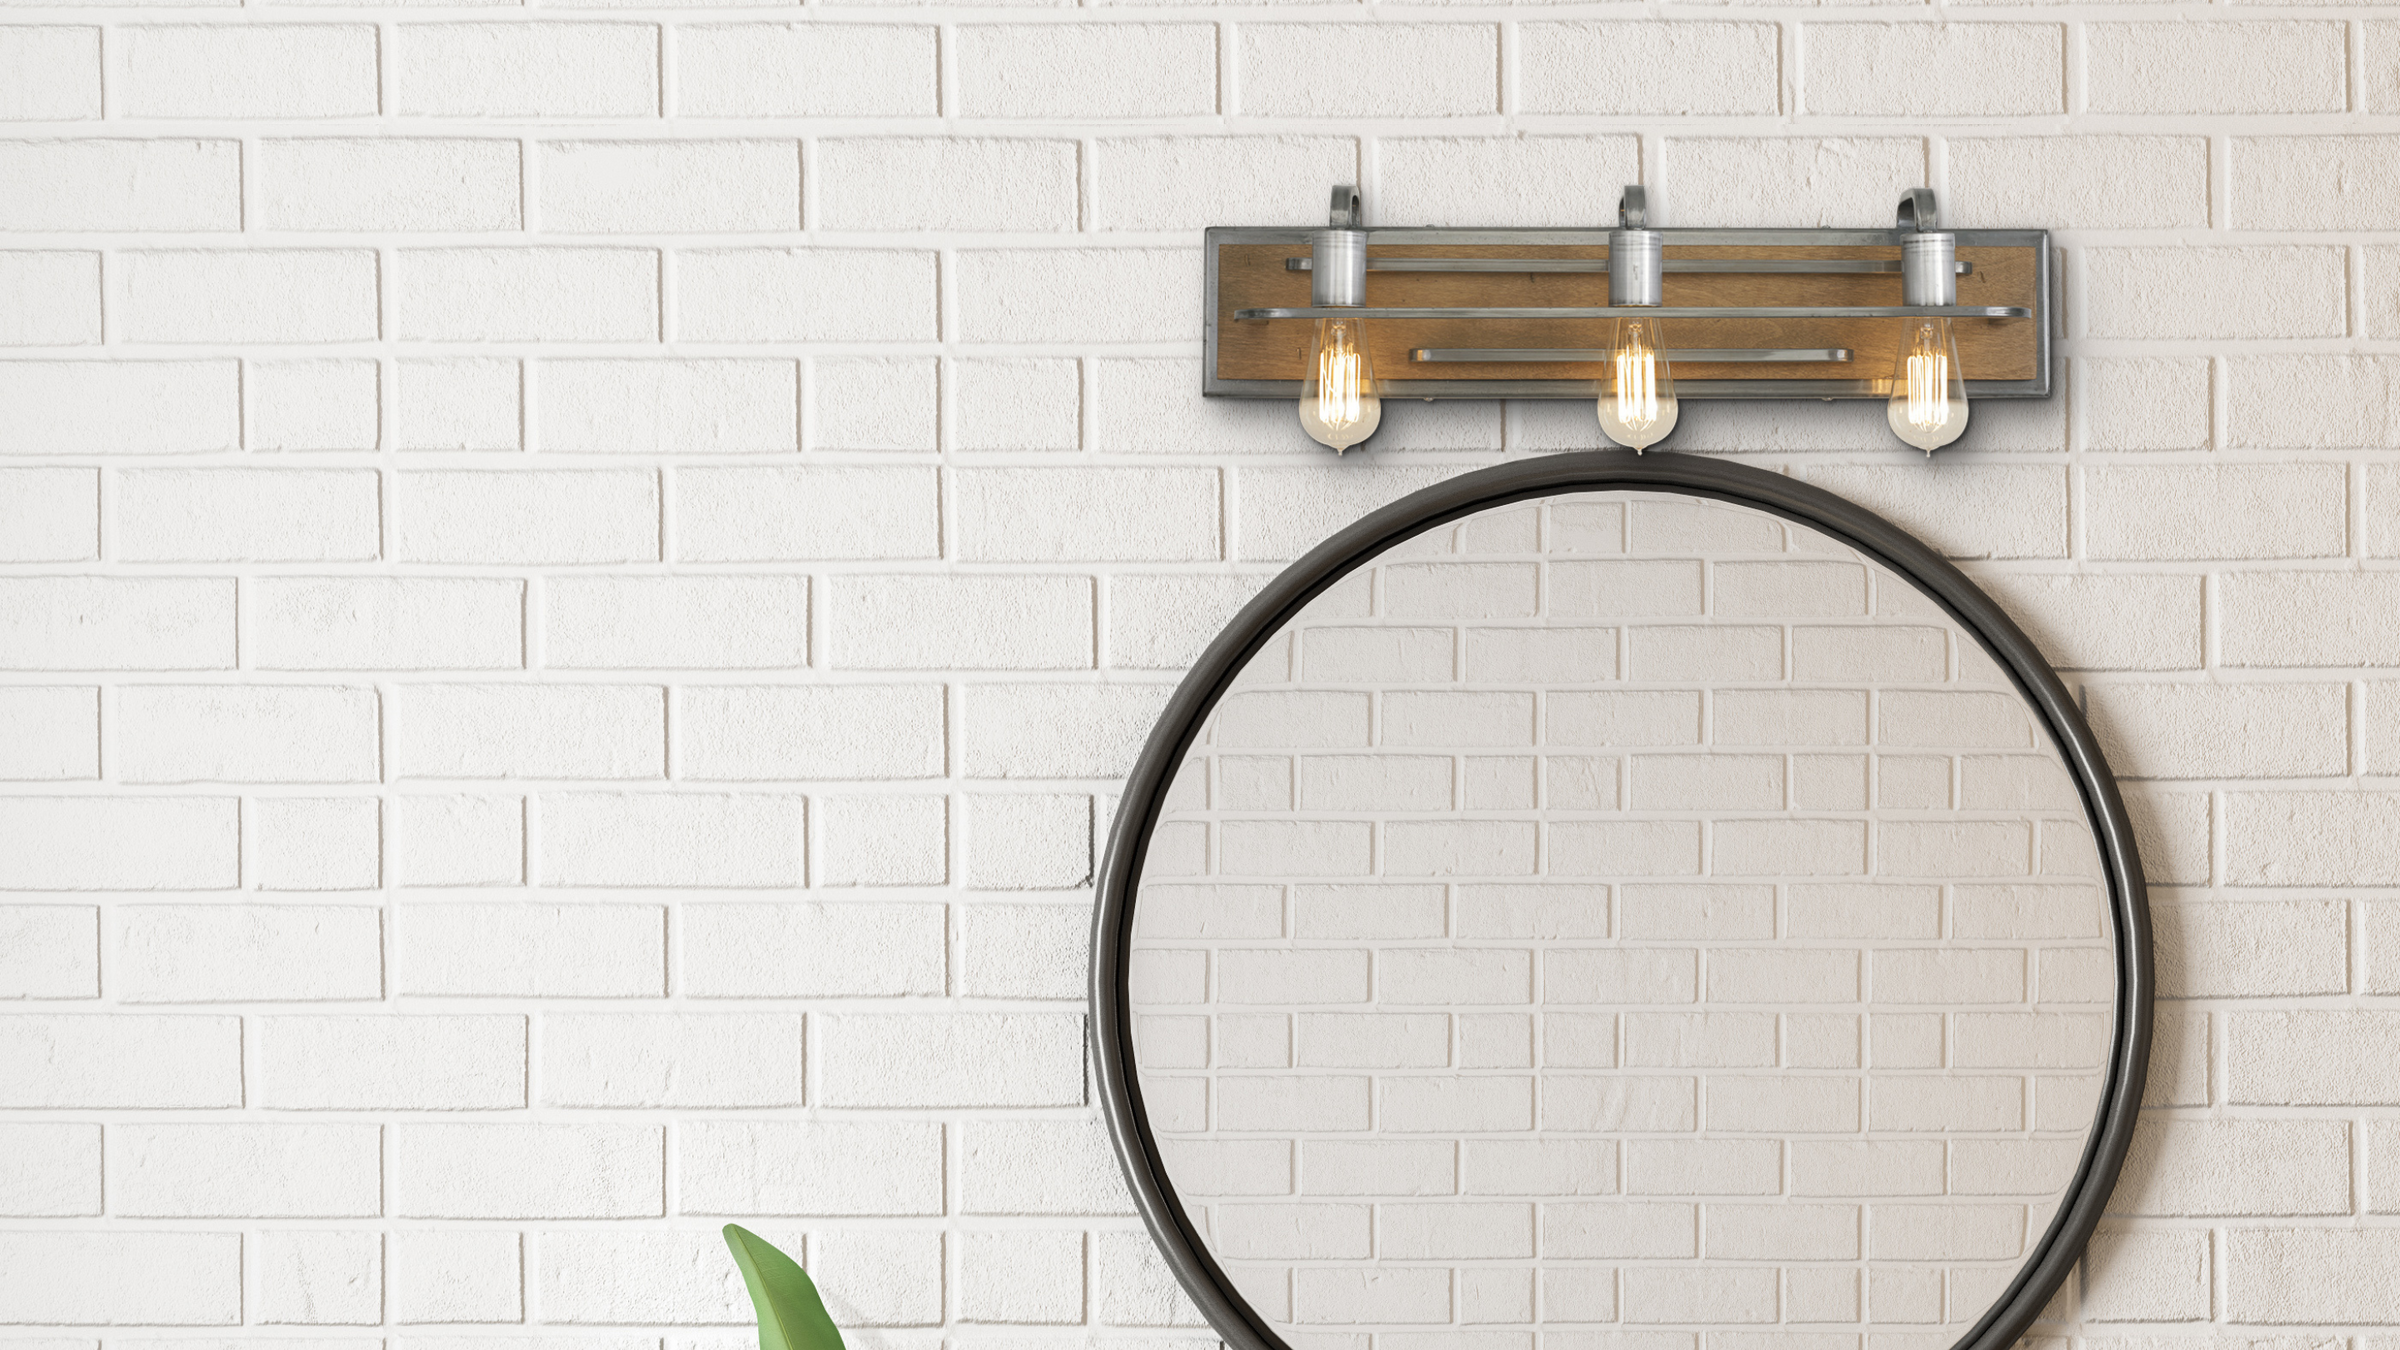 Lofty steel and wood bath fixture shown hung over mirror on a white brick wall